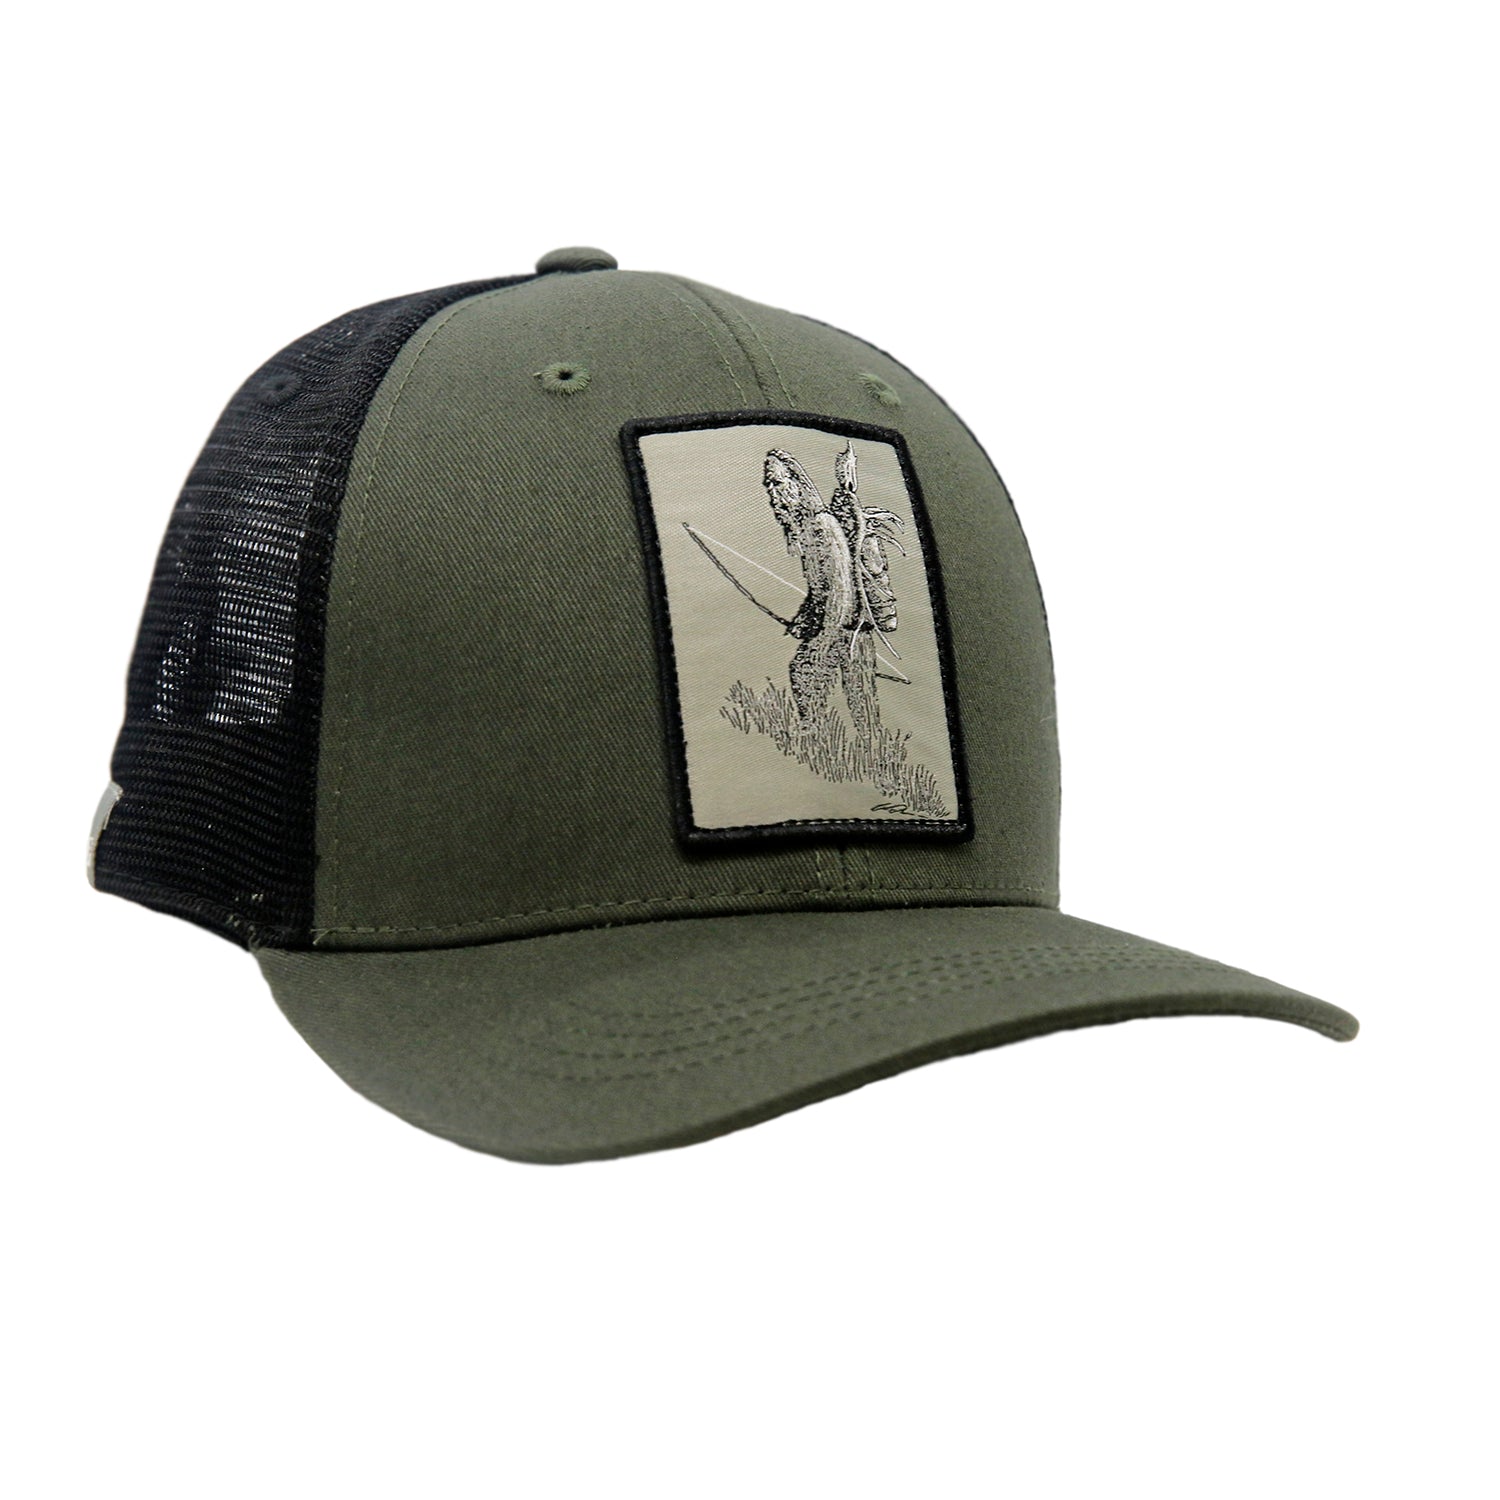 A hat with black mesh and green fabric in front has a patch with a sasquatch holding a bow with an elk skull and backpack on his back